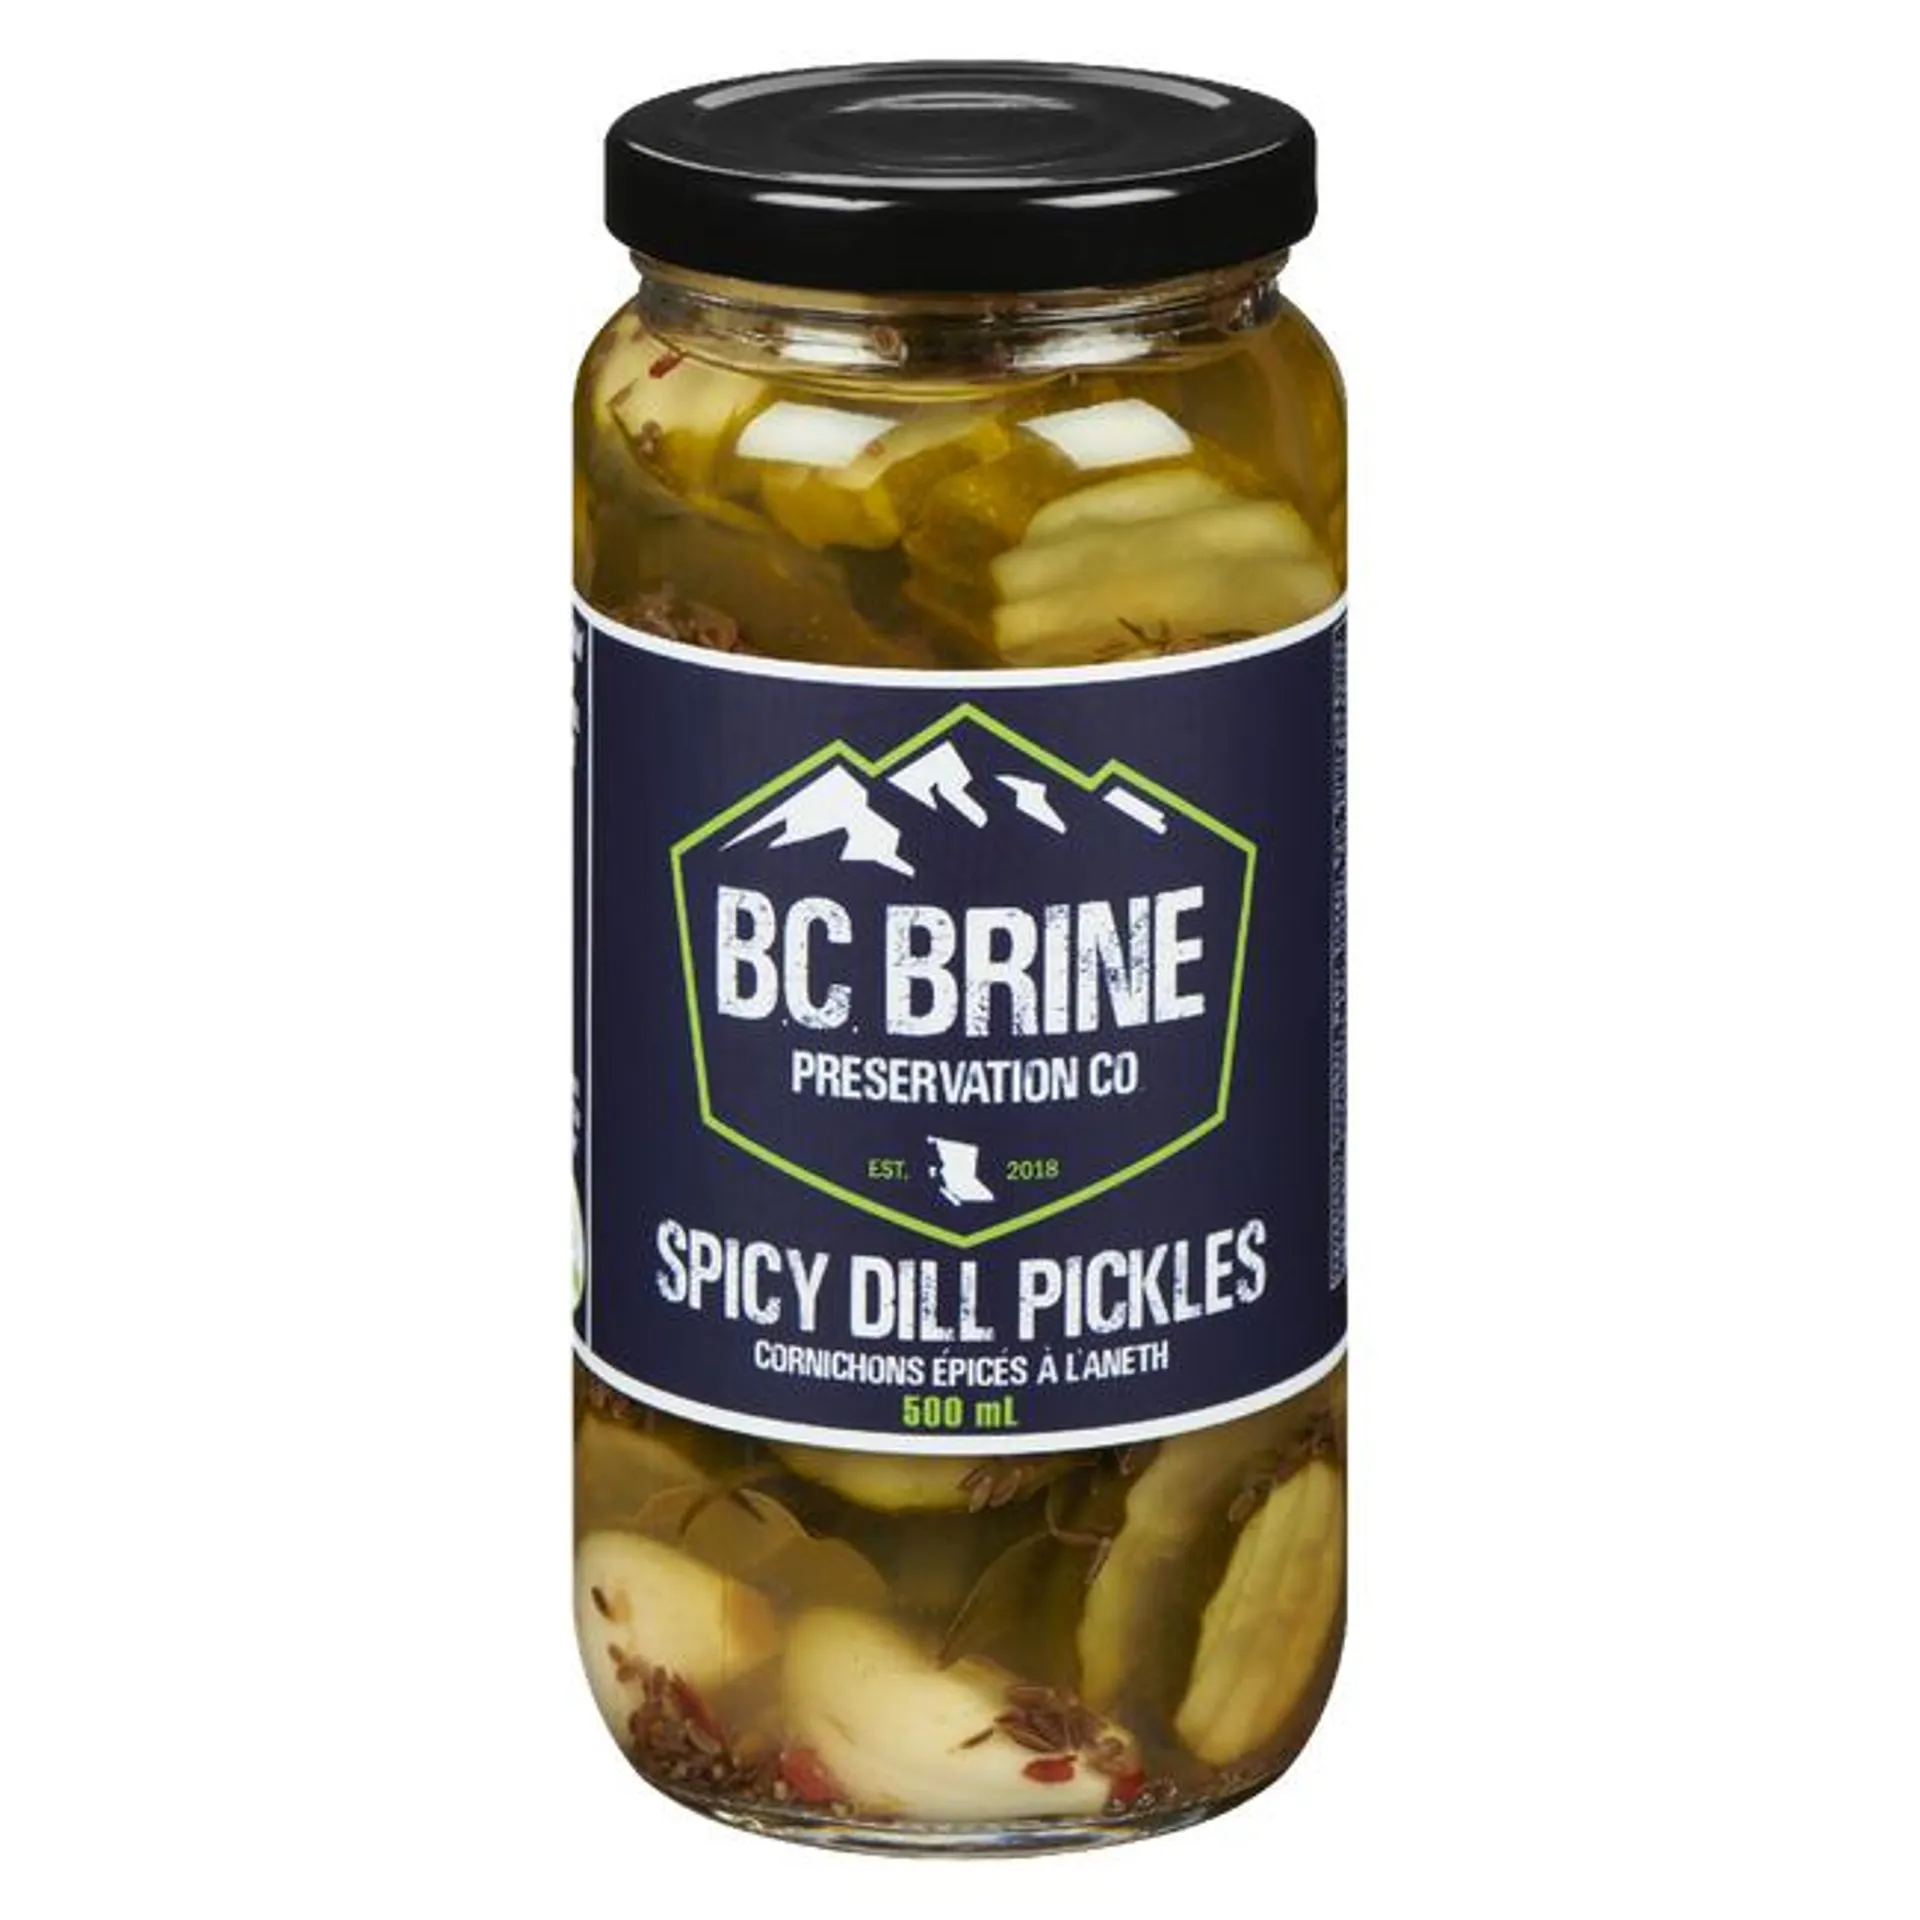 B.C. Brine Preservation Co. - Spicy Dill Pickles